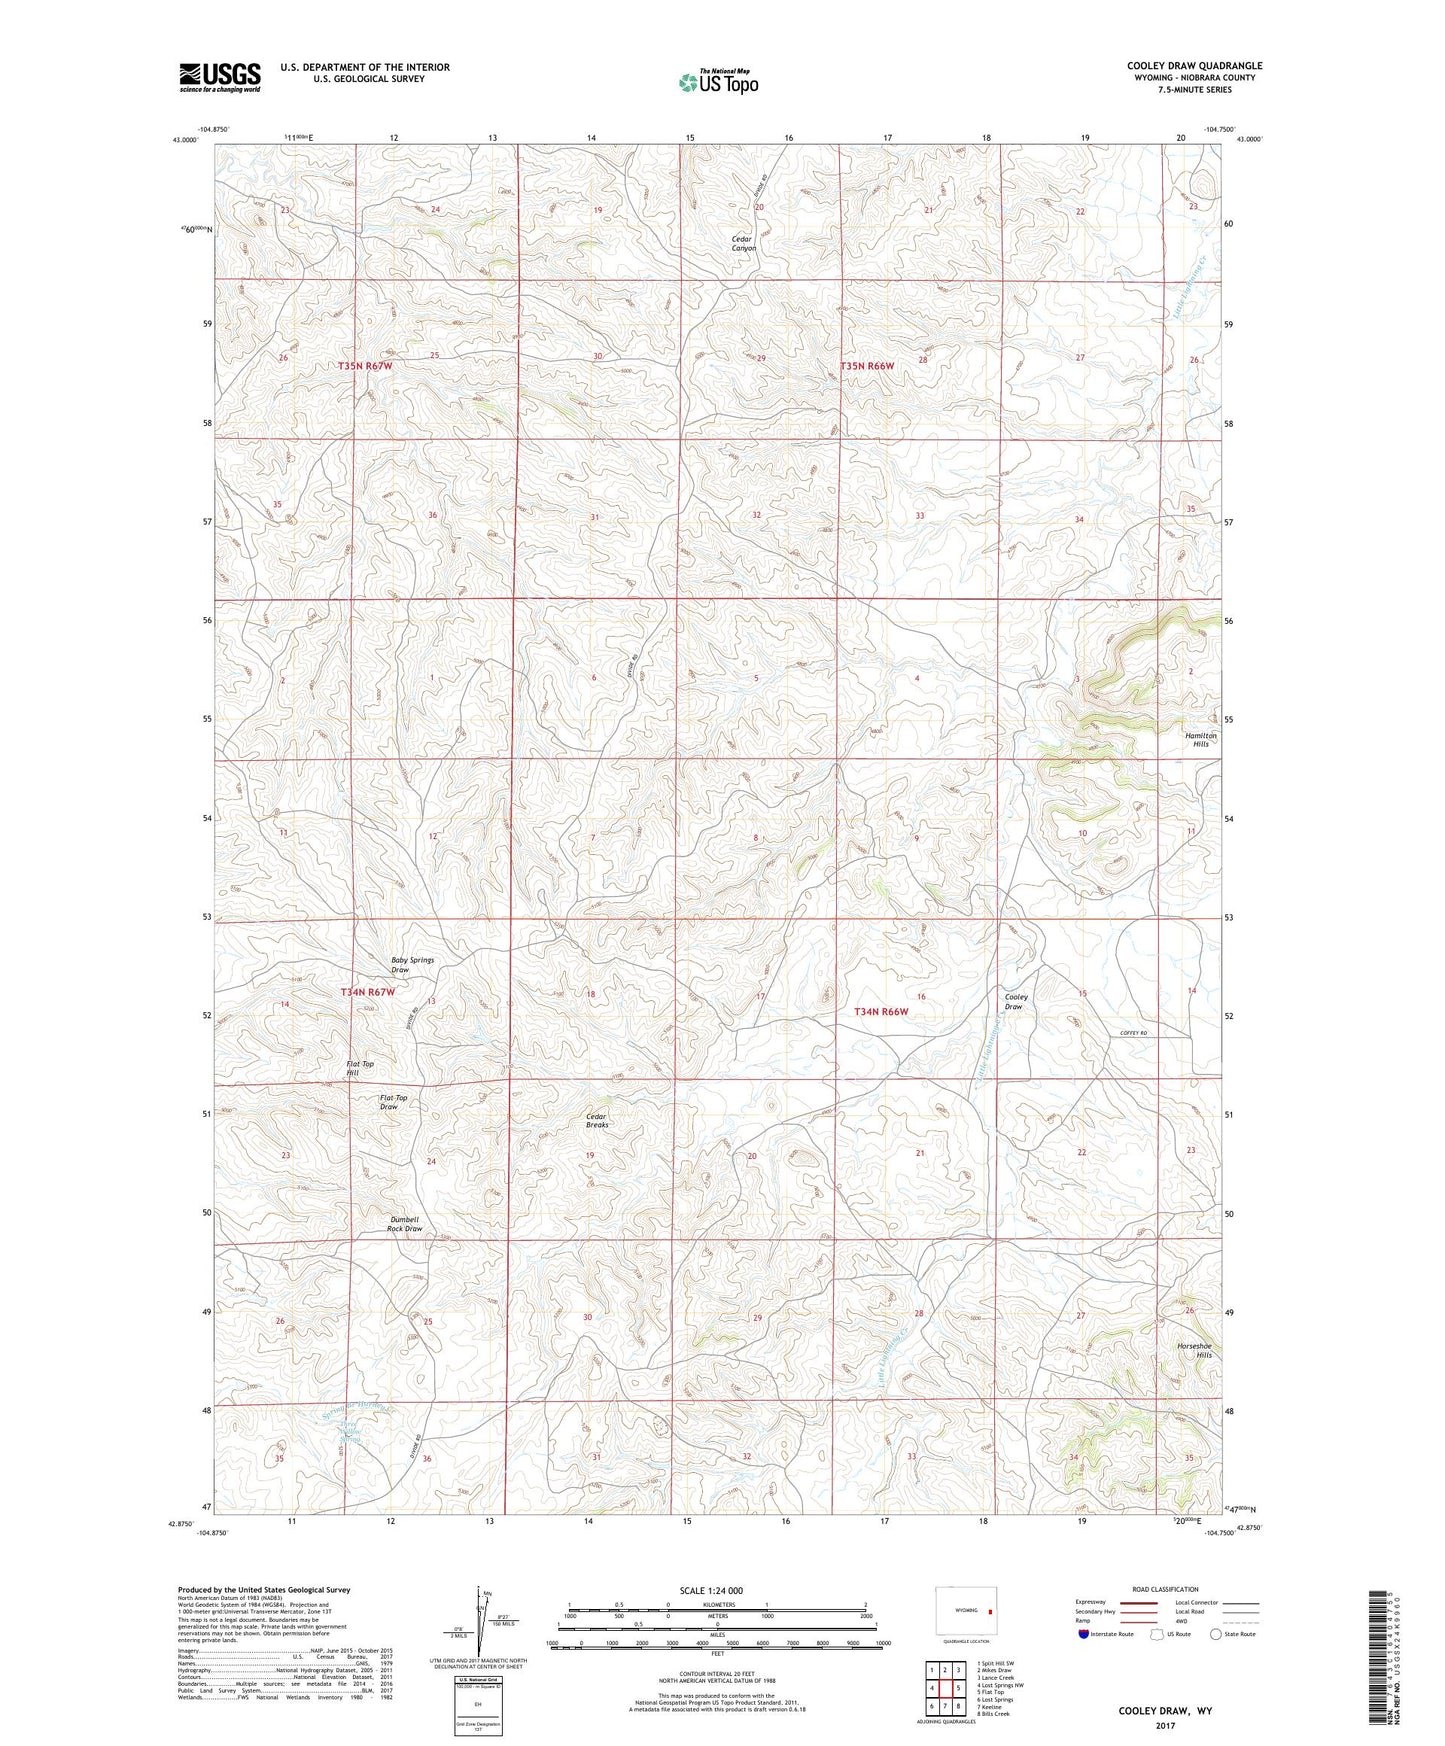 Cooley Draw Wyoming US Topo Map Image